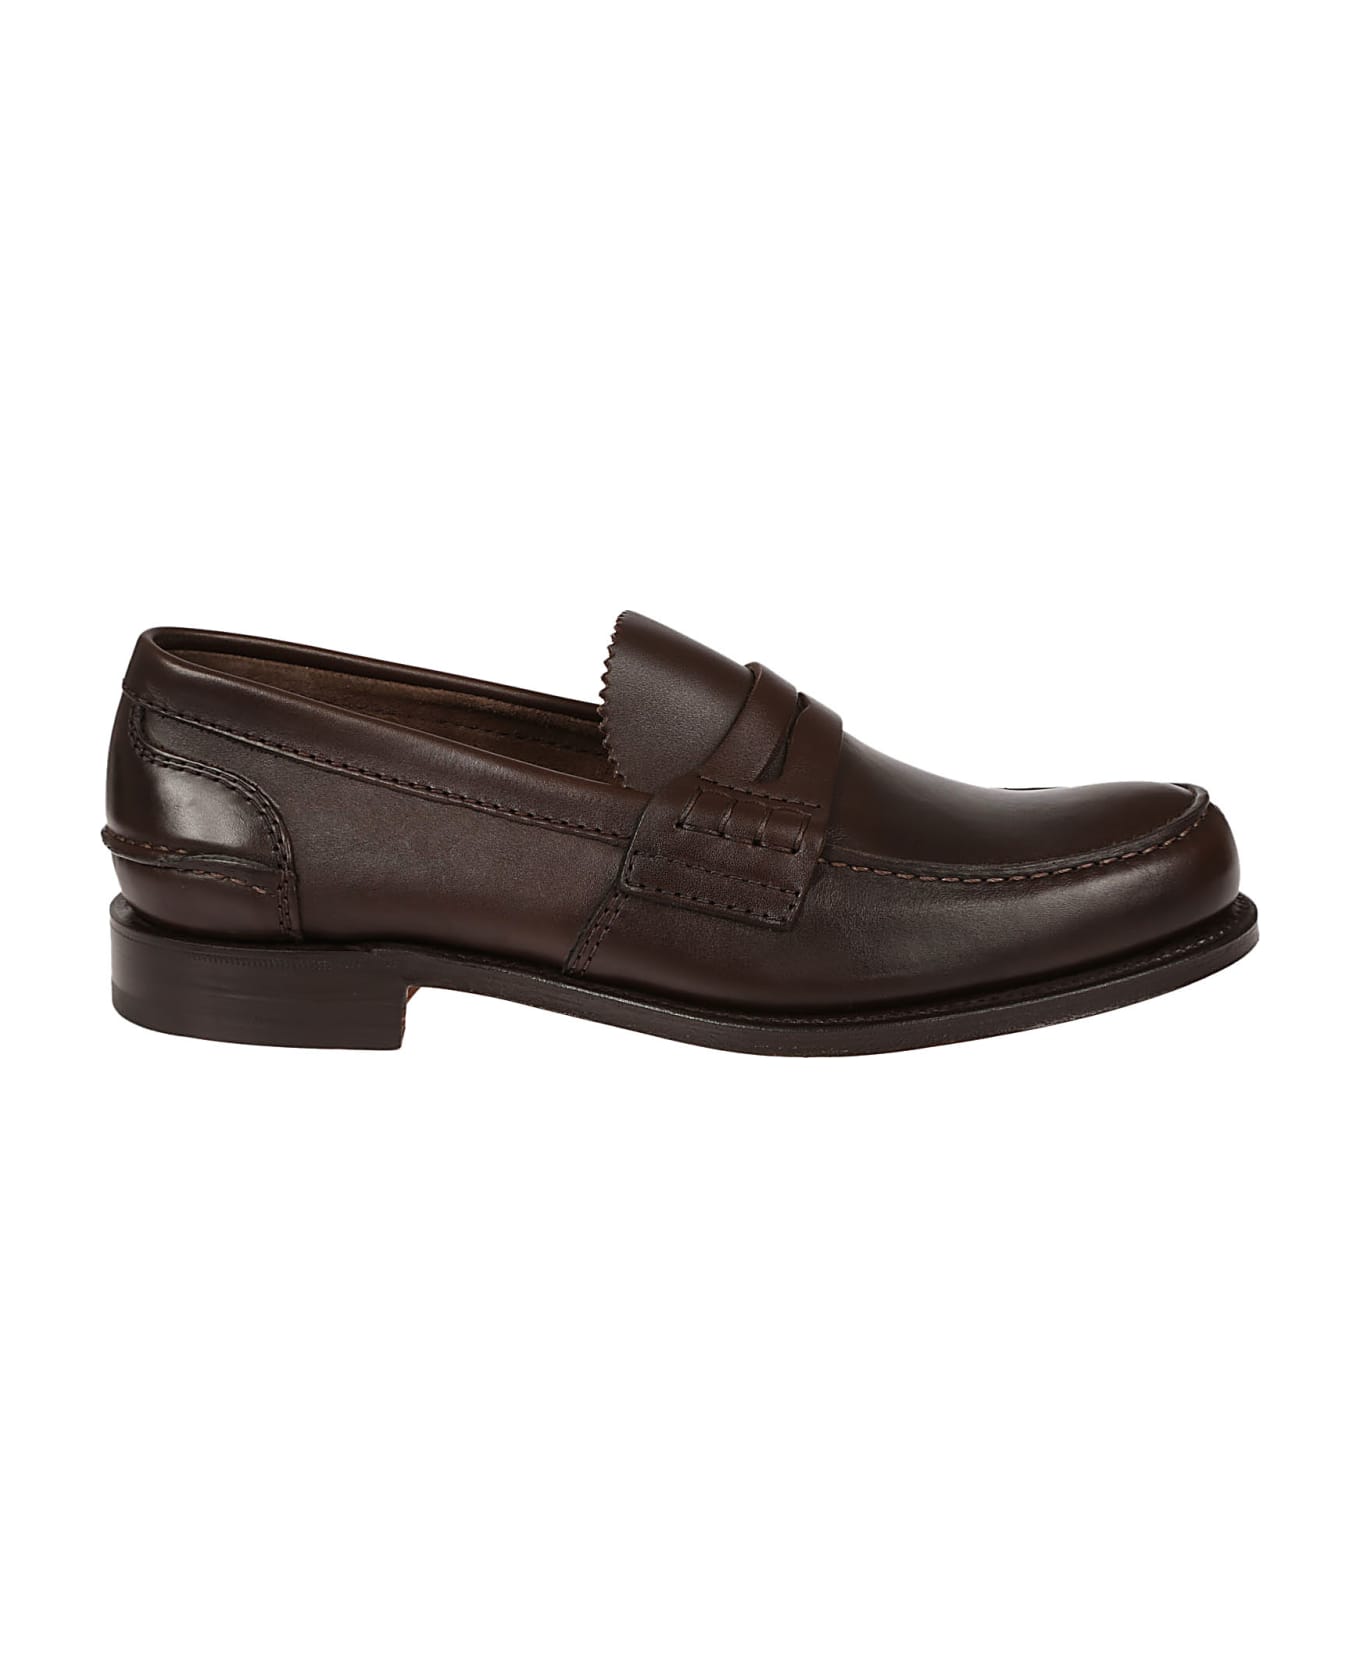 Church's Pembrey Loafers - Aad Brown ローファー＆デッキシューズ